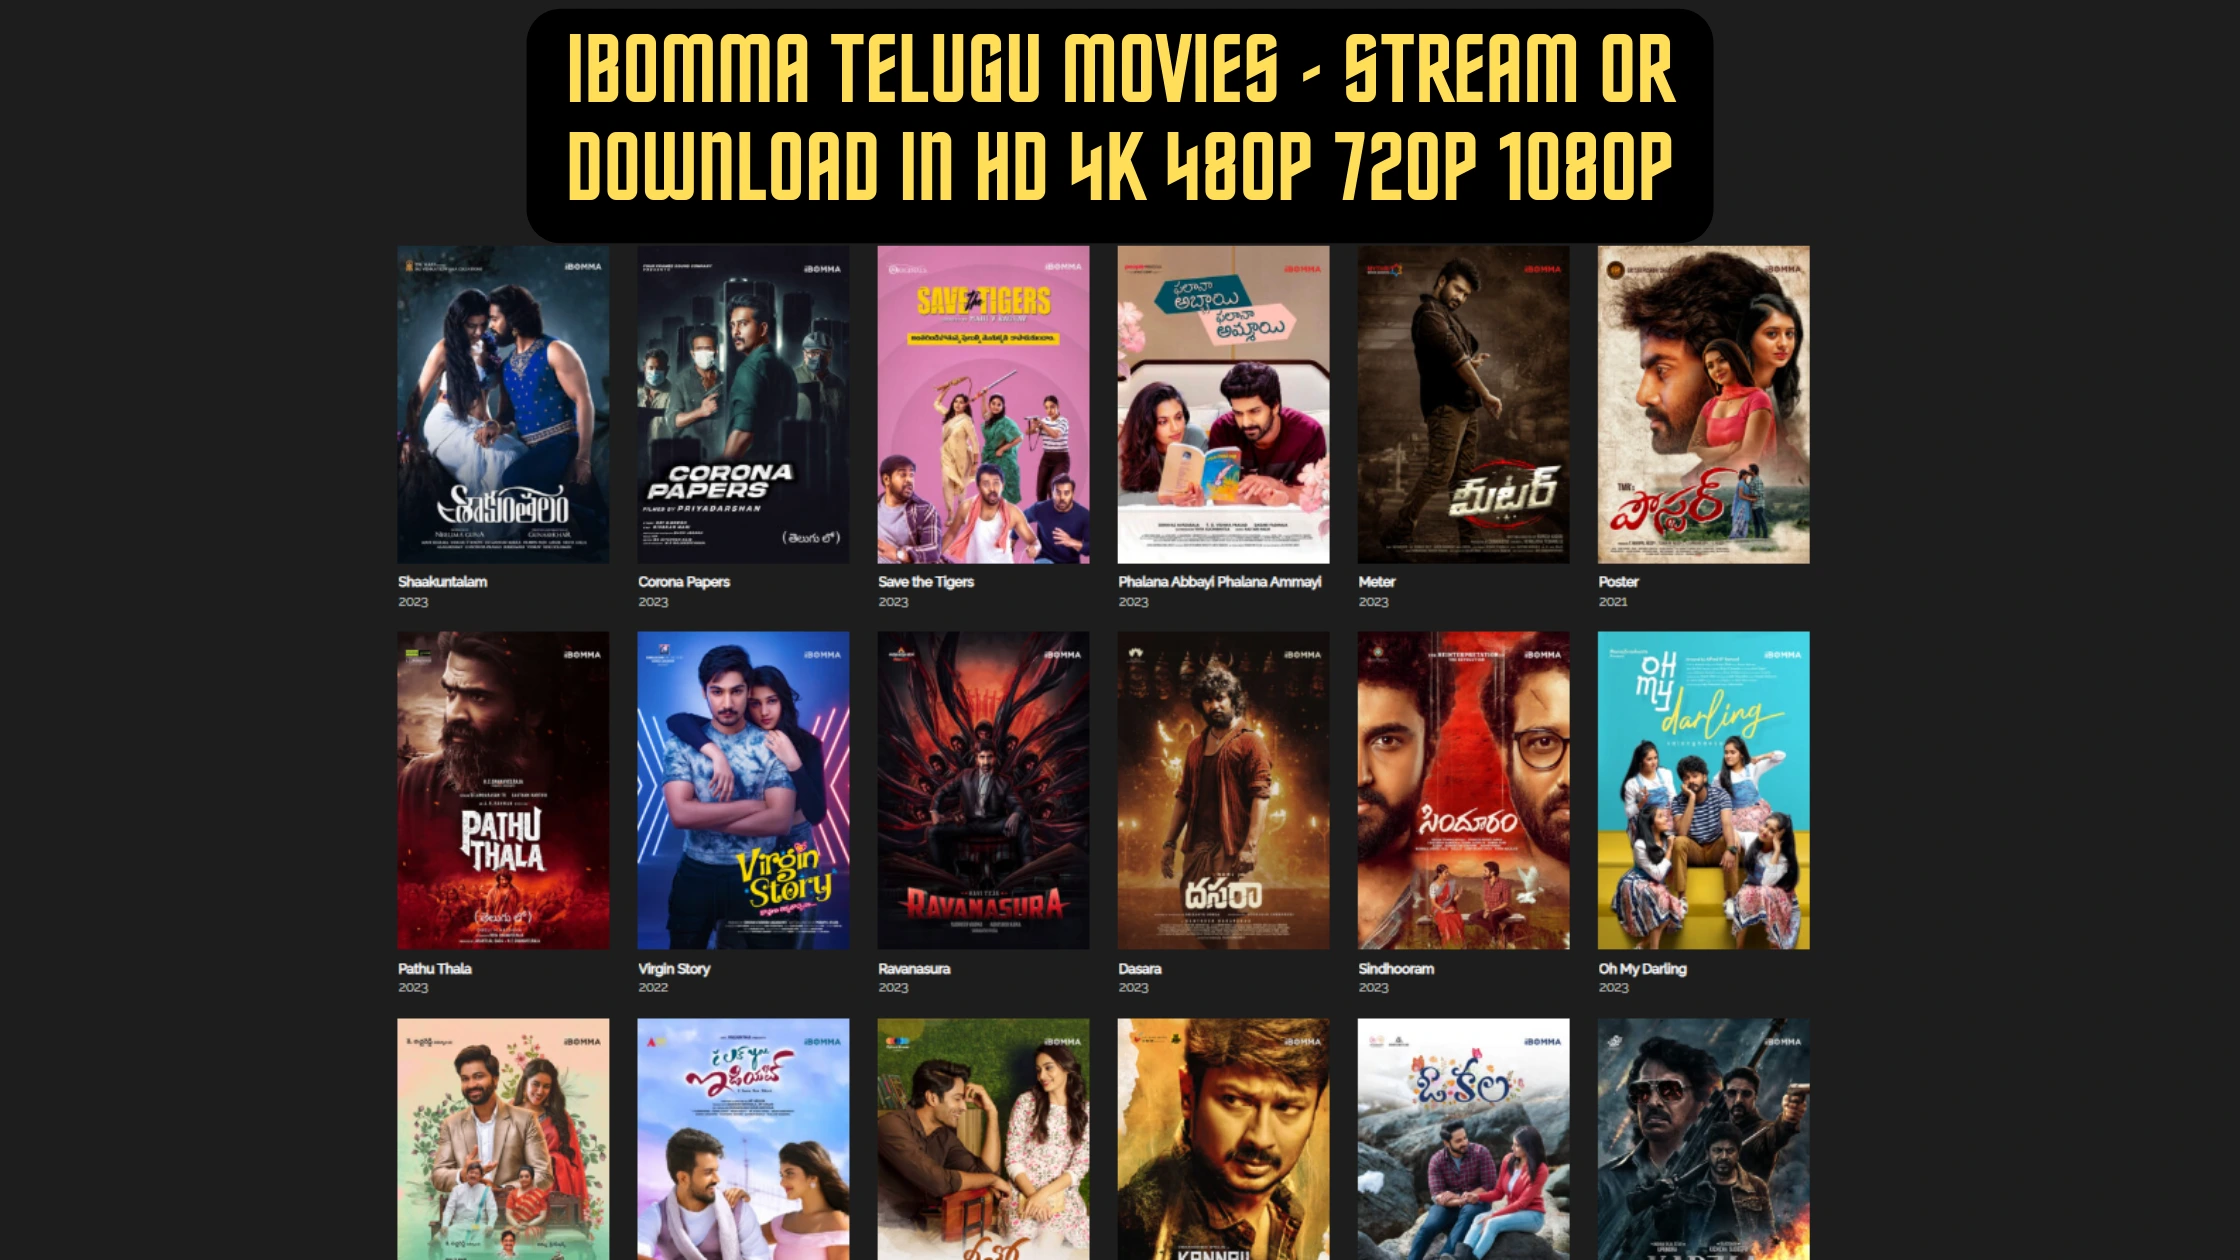 Ibomma app download apk If you are a fan of Telugu movies and web series, you might be interested in downloading the iBomma app on your Android device. iBomma is a popular online streaming platform that offers a huge collection of Telugu content, as well as dubbed movies and shows in other languages such as Hindi, Tamil, Bengali, Malayalam, etc. You can watch and download your favorite movies and web series for free on iBomma app, without any registration or subscription. Features of iBomma app iBomma app has a user-friendly interface and a simple design that makes it easy to navigate and find the content you want. iBomma app provides high-quality video streaming and downloading options. You can choose from different resolutions such as 480p, 720p, or HD, depending on your internet speed and device compatibility. iBomma app updates its content regularly and adds new releases and trending movies and web series. You can also watch trailers, songs, and news related to Telugu cinema on iBomma app. iBomma app supports multiple languages and subtitles. You can watch movies and web series in your native language or switch to other languages such as English, Hindi, Tamil, etc. You can also enable subtitles for better understanding. iBomma app allows you to save your favorite movies and web series offline for later viewing. You can also share them with your friends and family via social media or other apps. iBomma app is compatible with various devices such as smartphones, tablets, laptops, and smart TVs. You can enjoy watching movies and web series on a bigger screen by connecting your device to a projector or a screen mirroring device. How to download iBomma apk on Android? To download iBomma apk on your Android device, you need to follow these simple steps: Open your web browser and search for “iBomma apk download” on Google. Choose a reliable source to download the iBomma apk file. You can also download the latest version of the app from the official iBomma website123. Once you’ve found a trusted source, click on the download button to start the download process. The apk file will be saved in your device’s download folder or any other location you choose. Before installing the apk file, you need to enable the “Unknown Sources” option on your device settings. This will allow you to install apps from sources other than the Google Play Store. To enable the “Unknown Sources” option, go to Settings > Security > Unknown Sources and toggle it on. Now go to the download folder or the location where you saved the apk file and tap on it to start the installation process. Follow the instructions on the screen and wait for the installation to complete. Once the installation is done, you can launch the iBomma app from your app drawer or home screen and enjoy watching Telugu movies and web series for free.